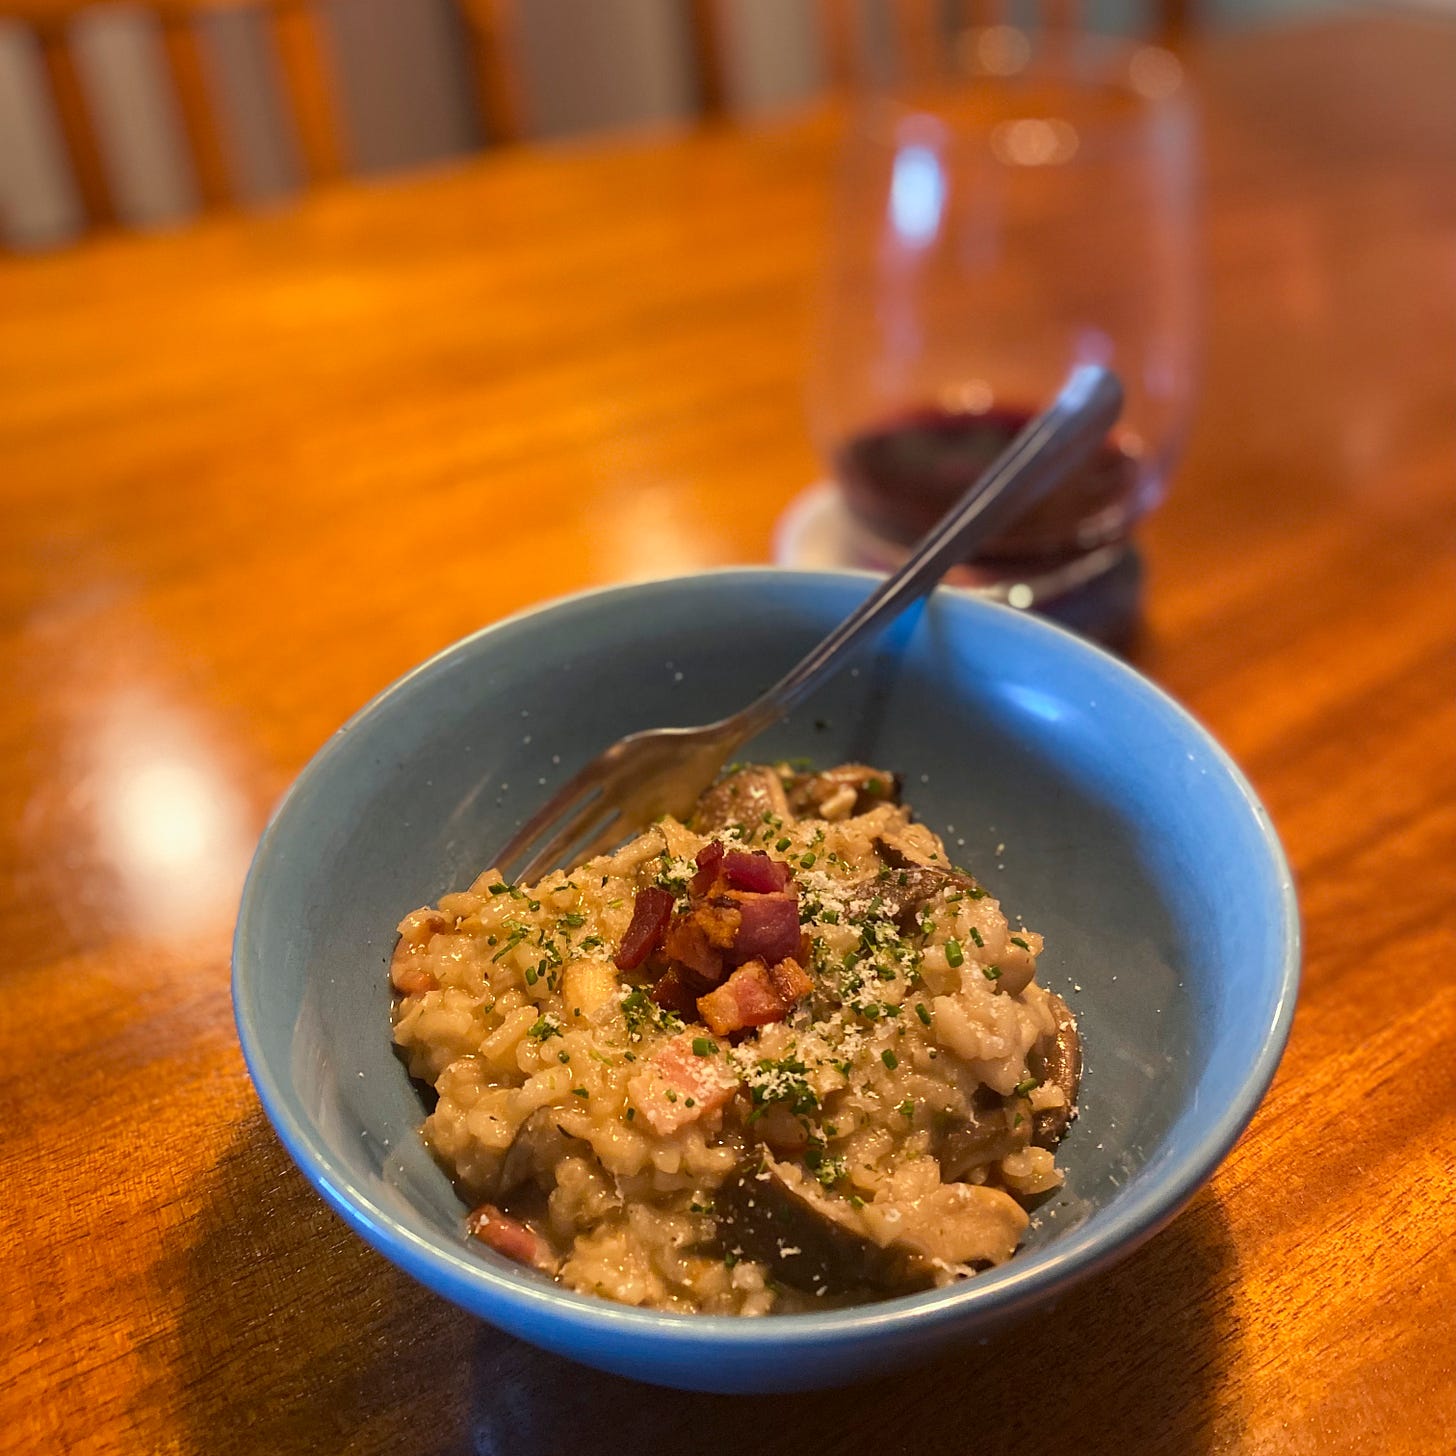 A blue bowl of the risotto, garnished with a small pile of bacon pieces, parsley, and parmesan. A glass of red wine is on the coaster behind it, and a fork rests at the side of the bowl.